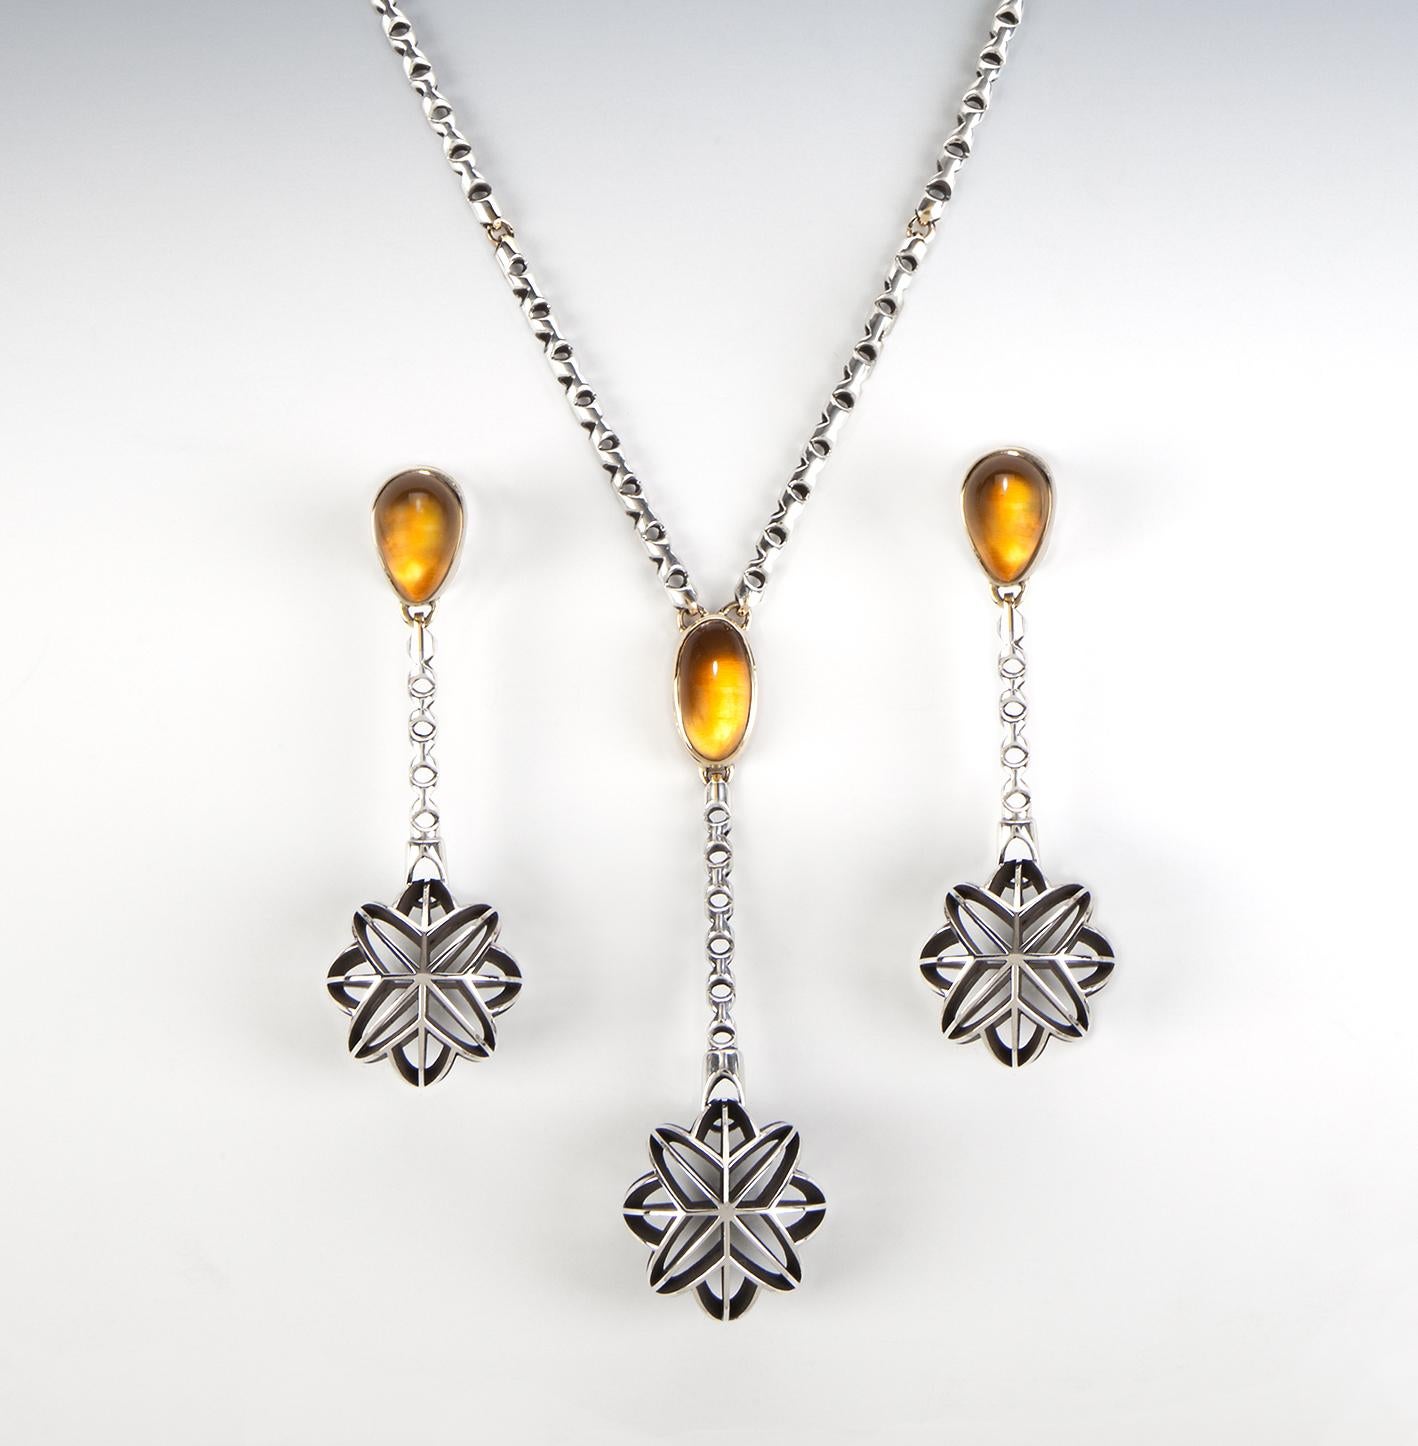 Sterling Silver and Gold necklace and matching earrings with custom cut Citrine cabochons.  From the 2019 Saul Bell Design Awards winning collection entitled 'Sunshine and Shadow'.  Hand fabricated chain in Sterling Silver with Gold linkages, custom